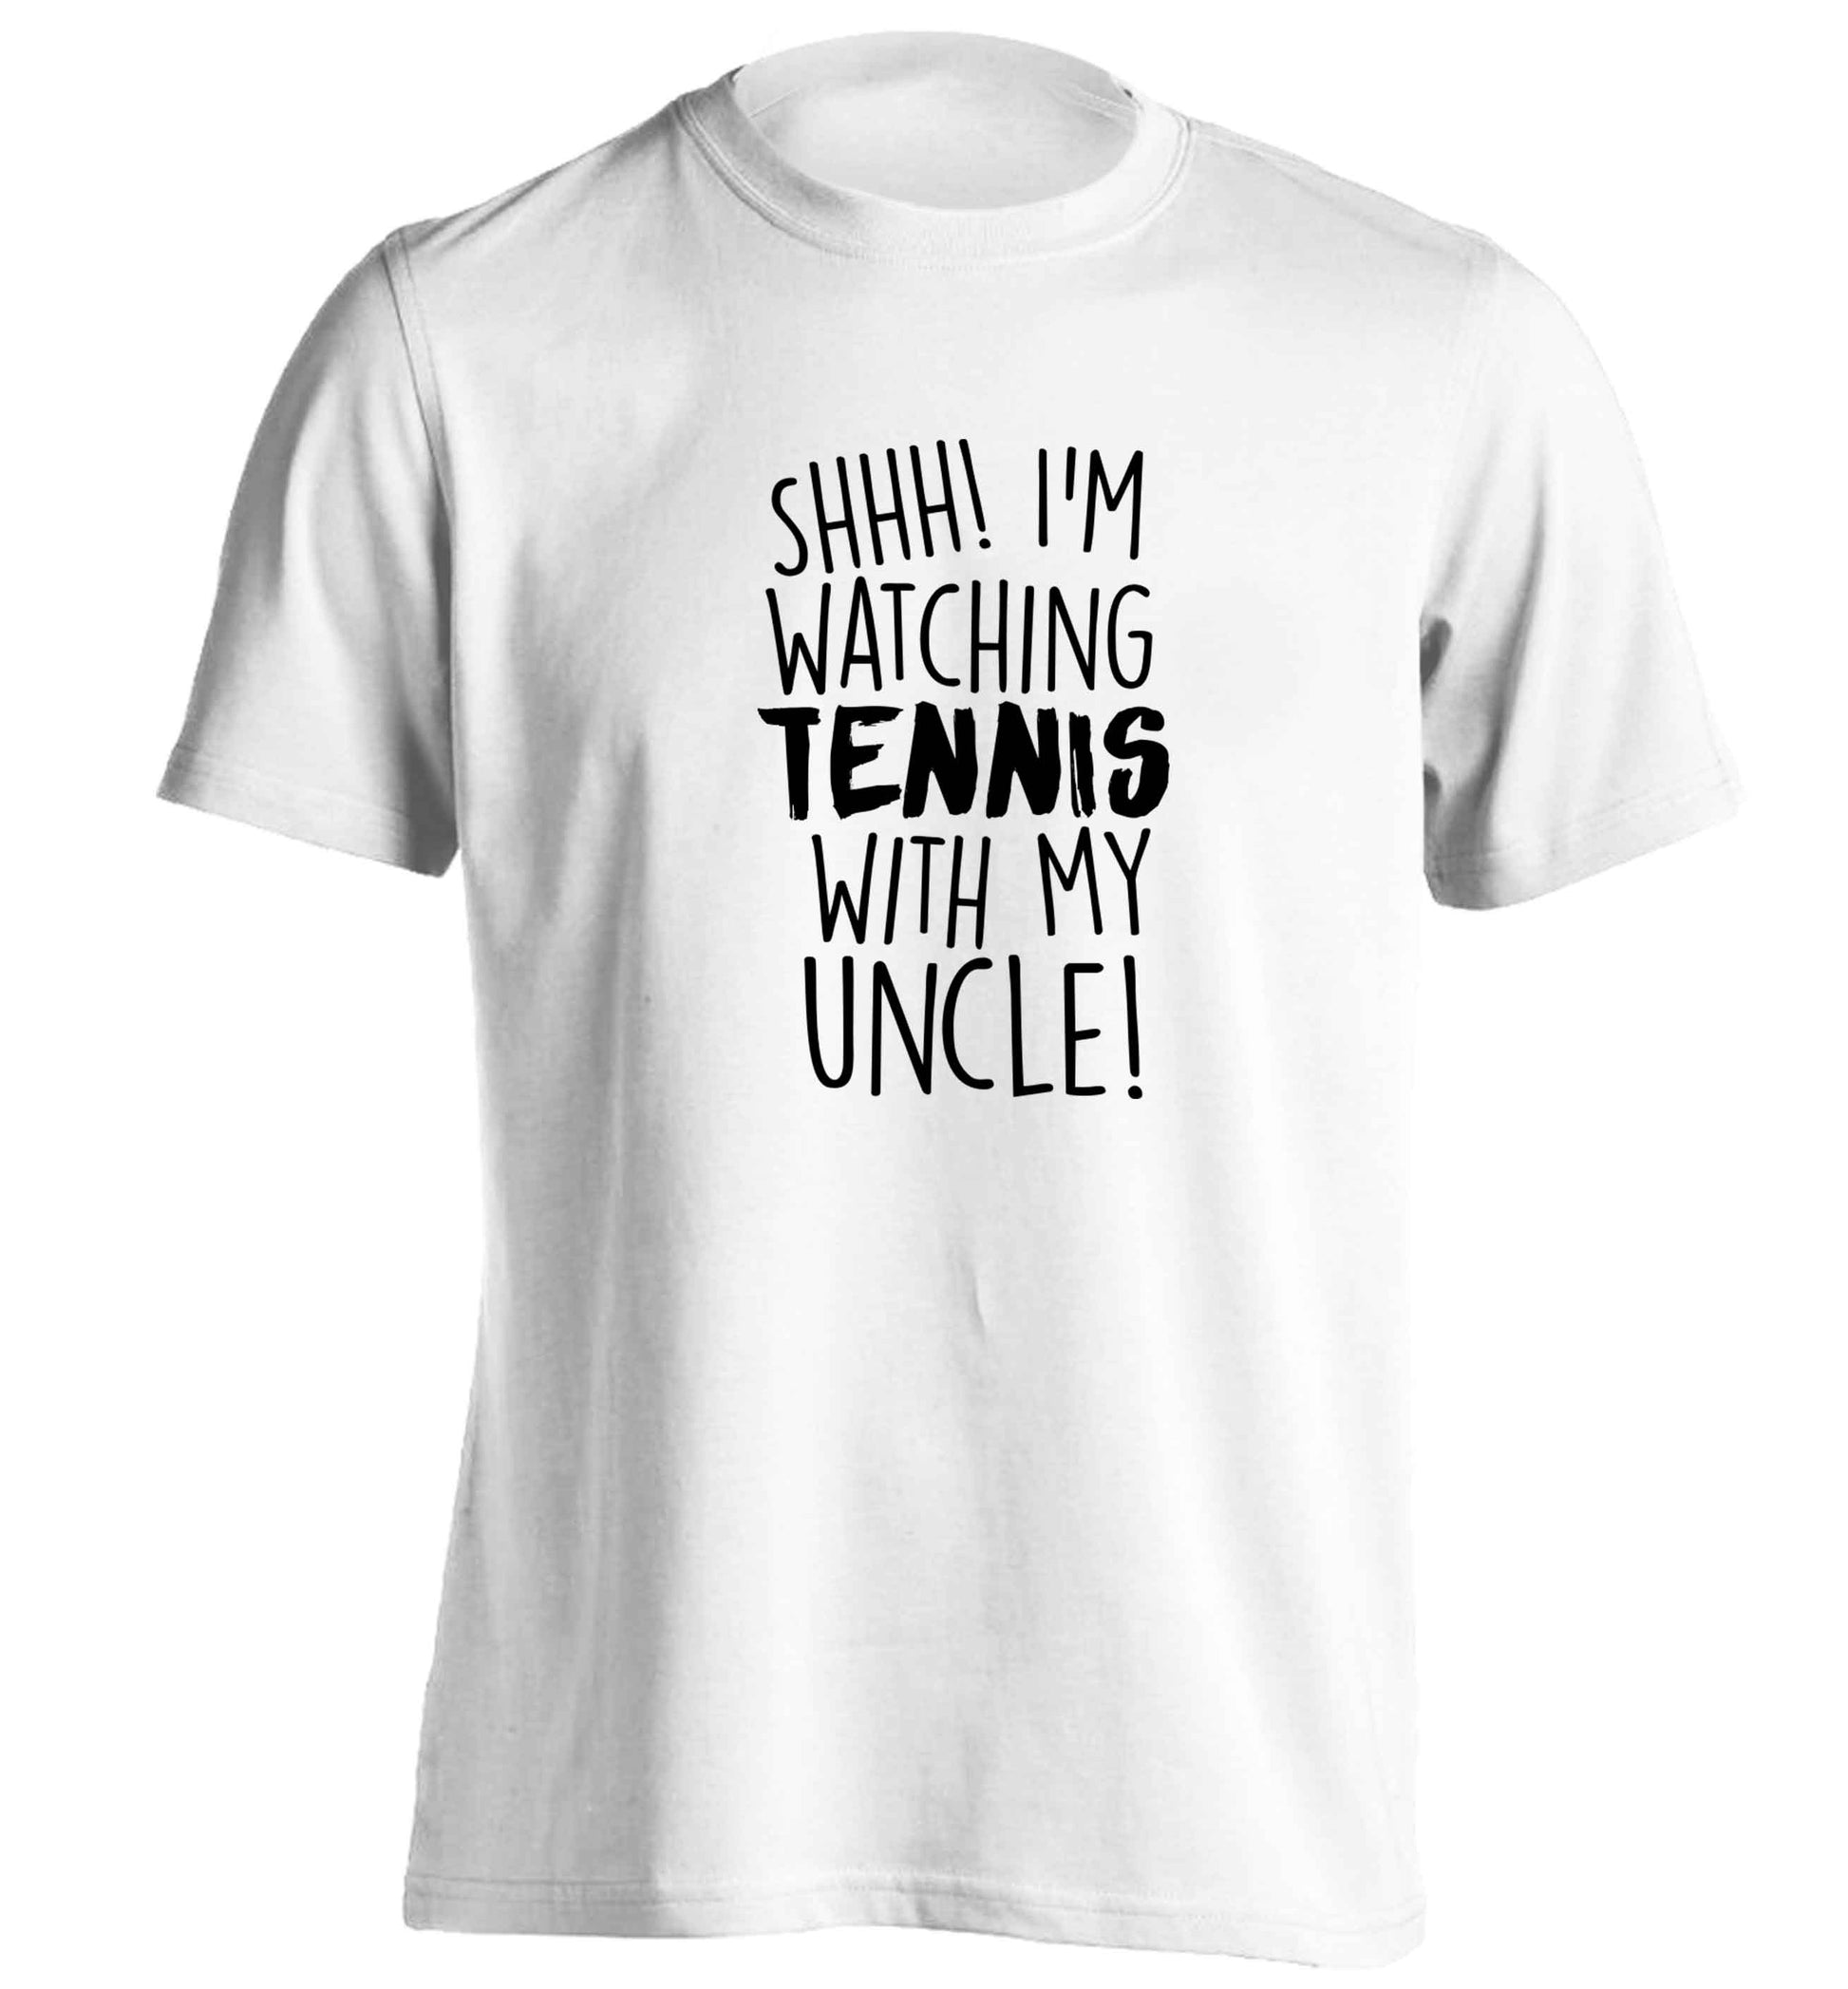 Shh! I'm watching tennis with my uncle! adults unisex white Tshirt 2XL